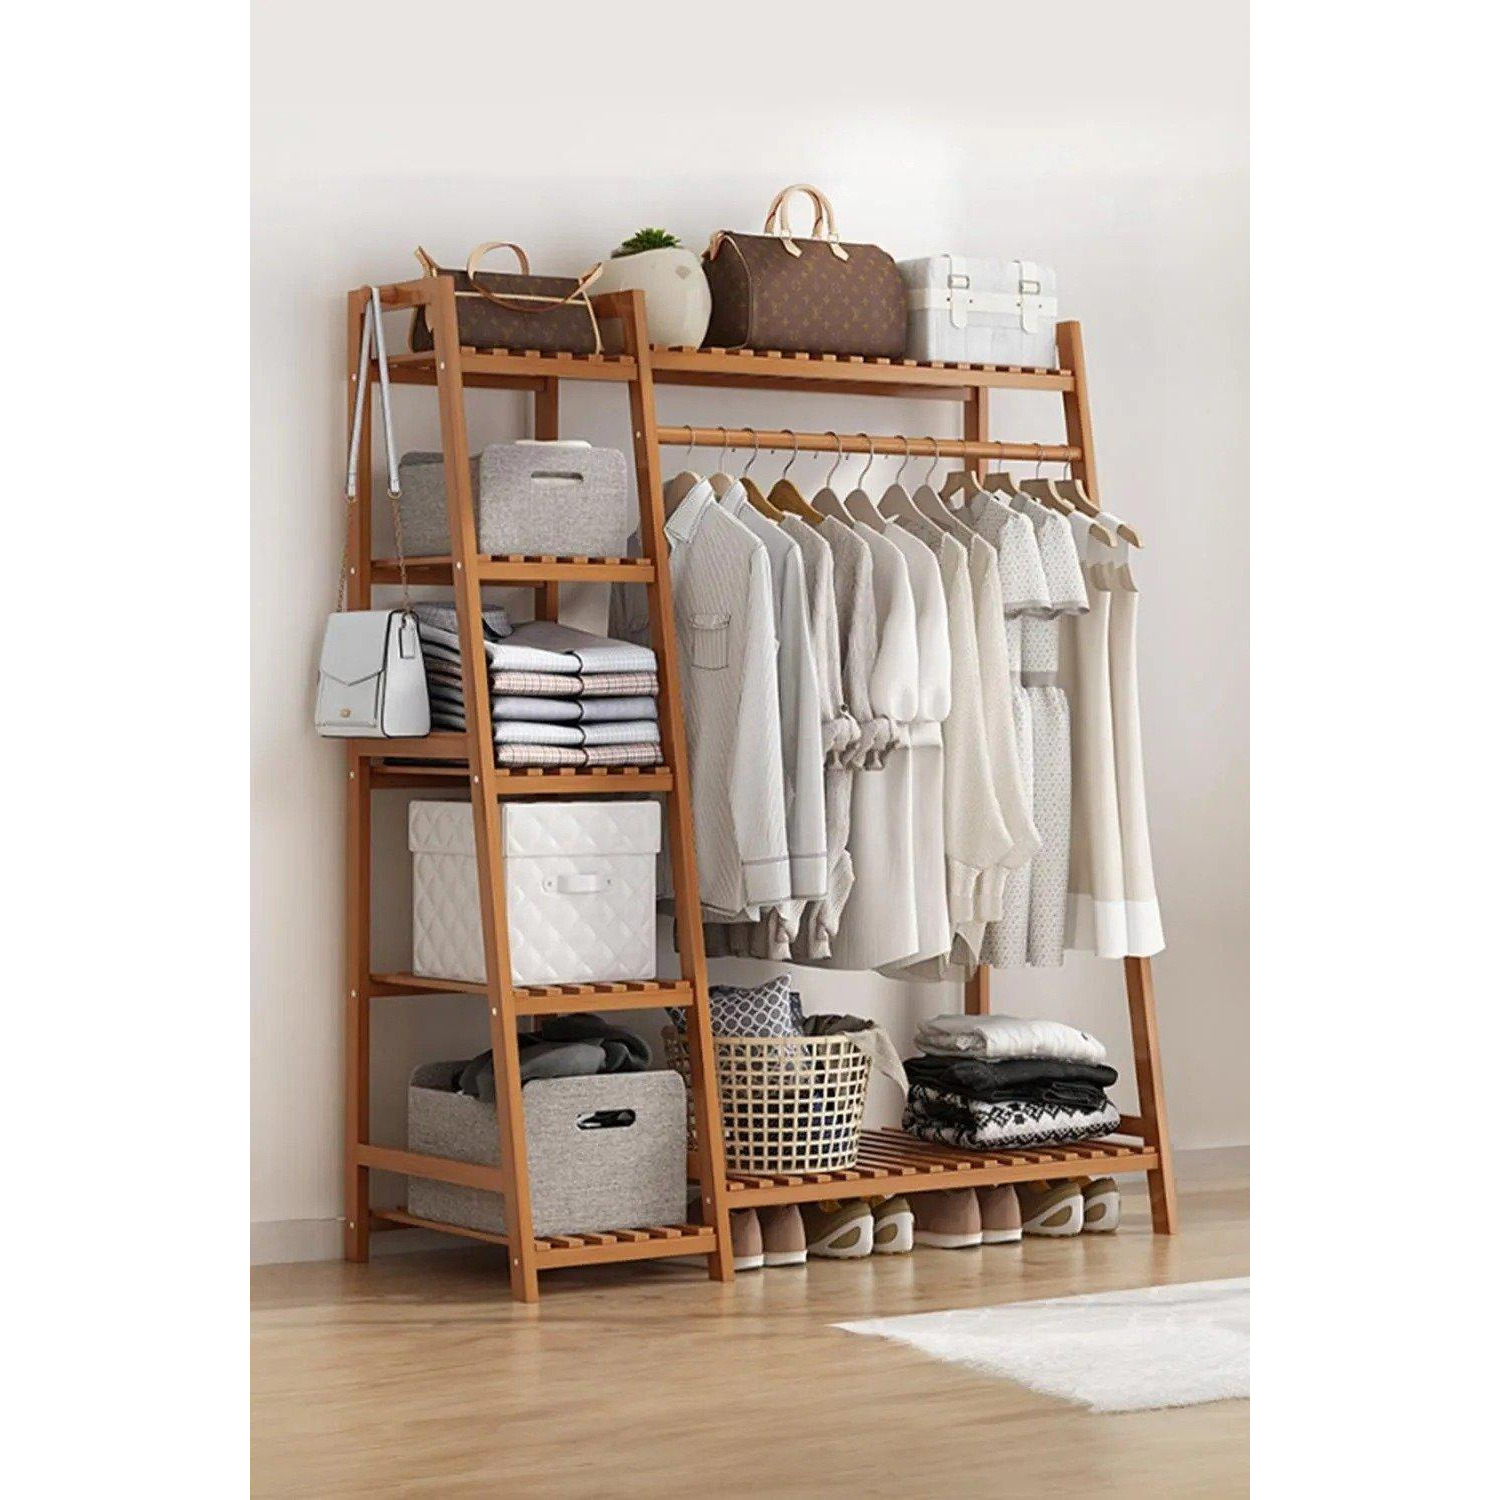 Multi-Functional Bamboo Garment Clothes Rack - image 1